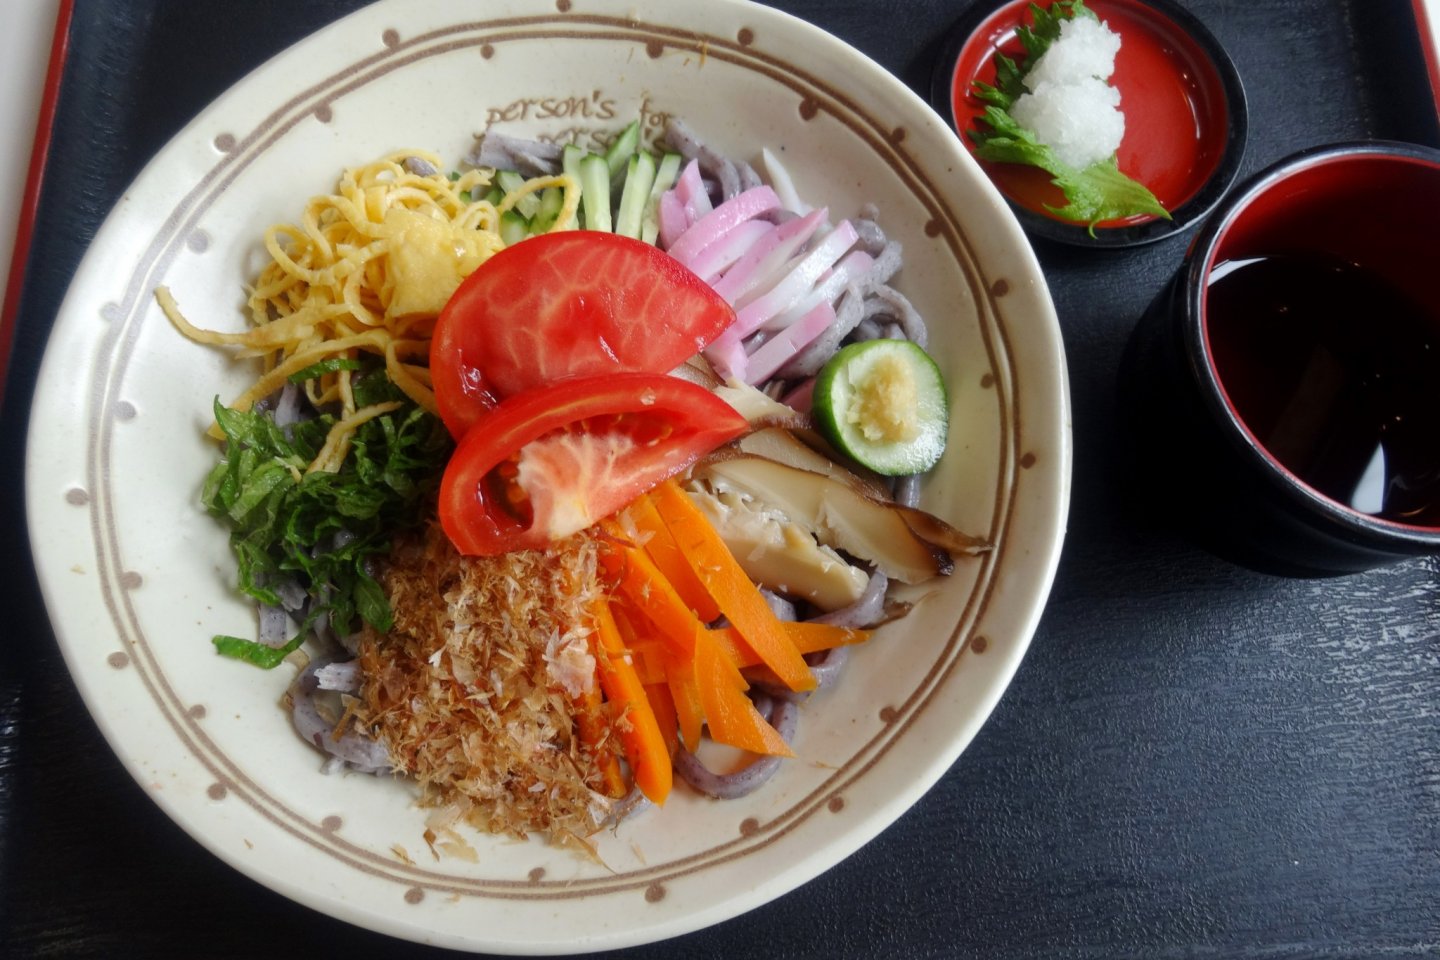 The tasty (and cheap) hiyashi udon lunch